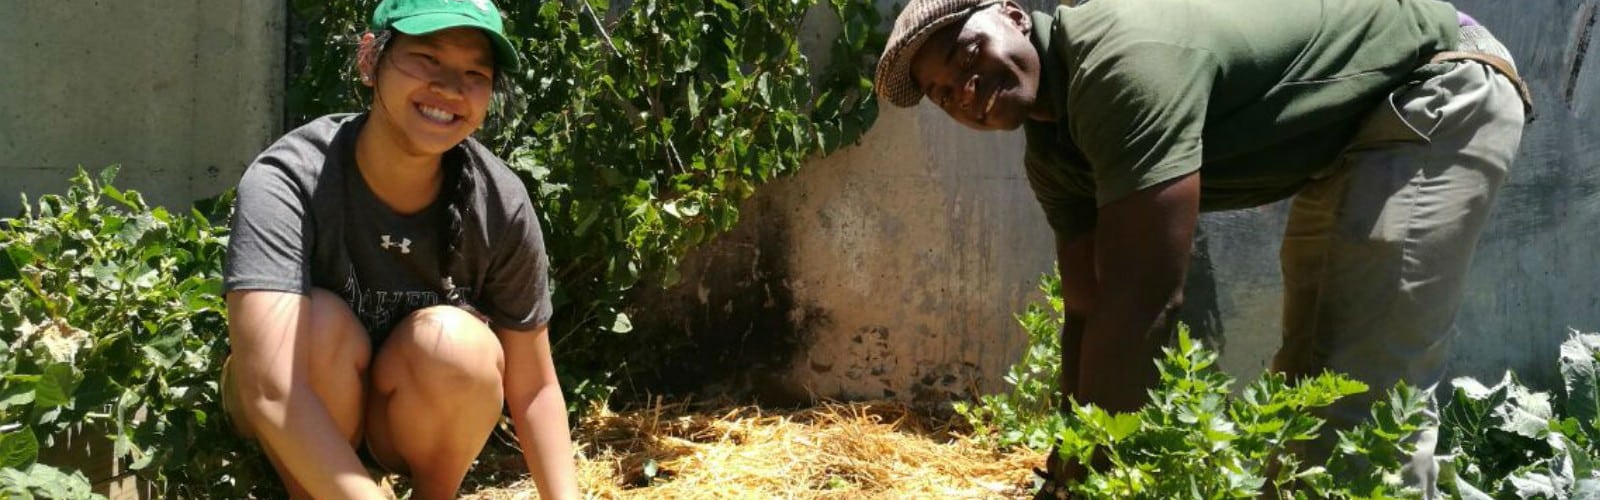 A Day with Vera, Food Security and Urban Farming Intern